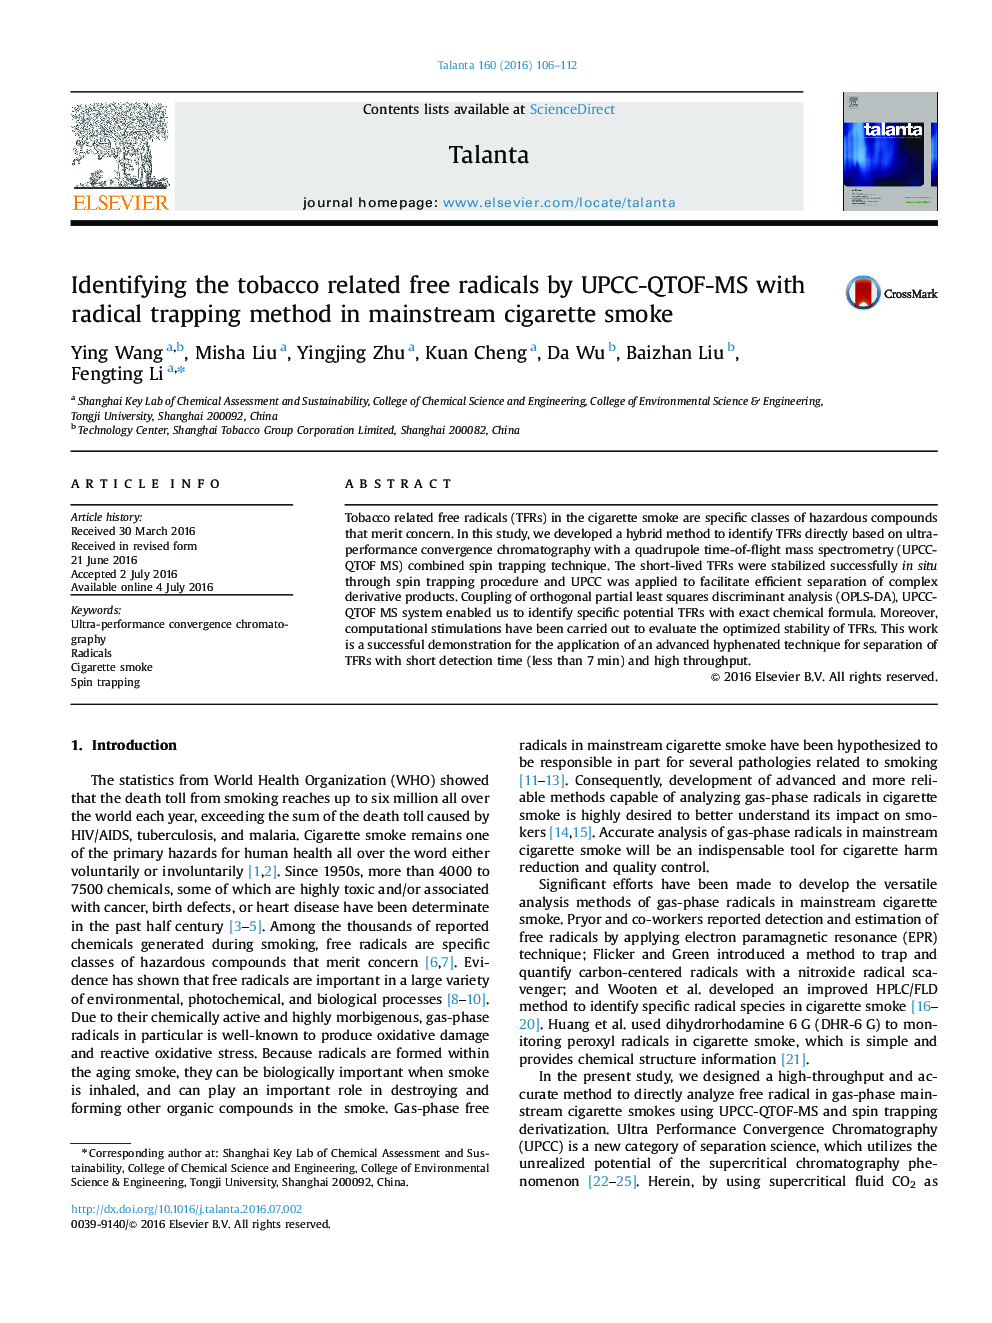 Identifying the tobacco related free radicals by UPCC-QTOF-MS with radical trapping method in mainstream cigarette smoke